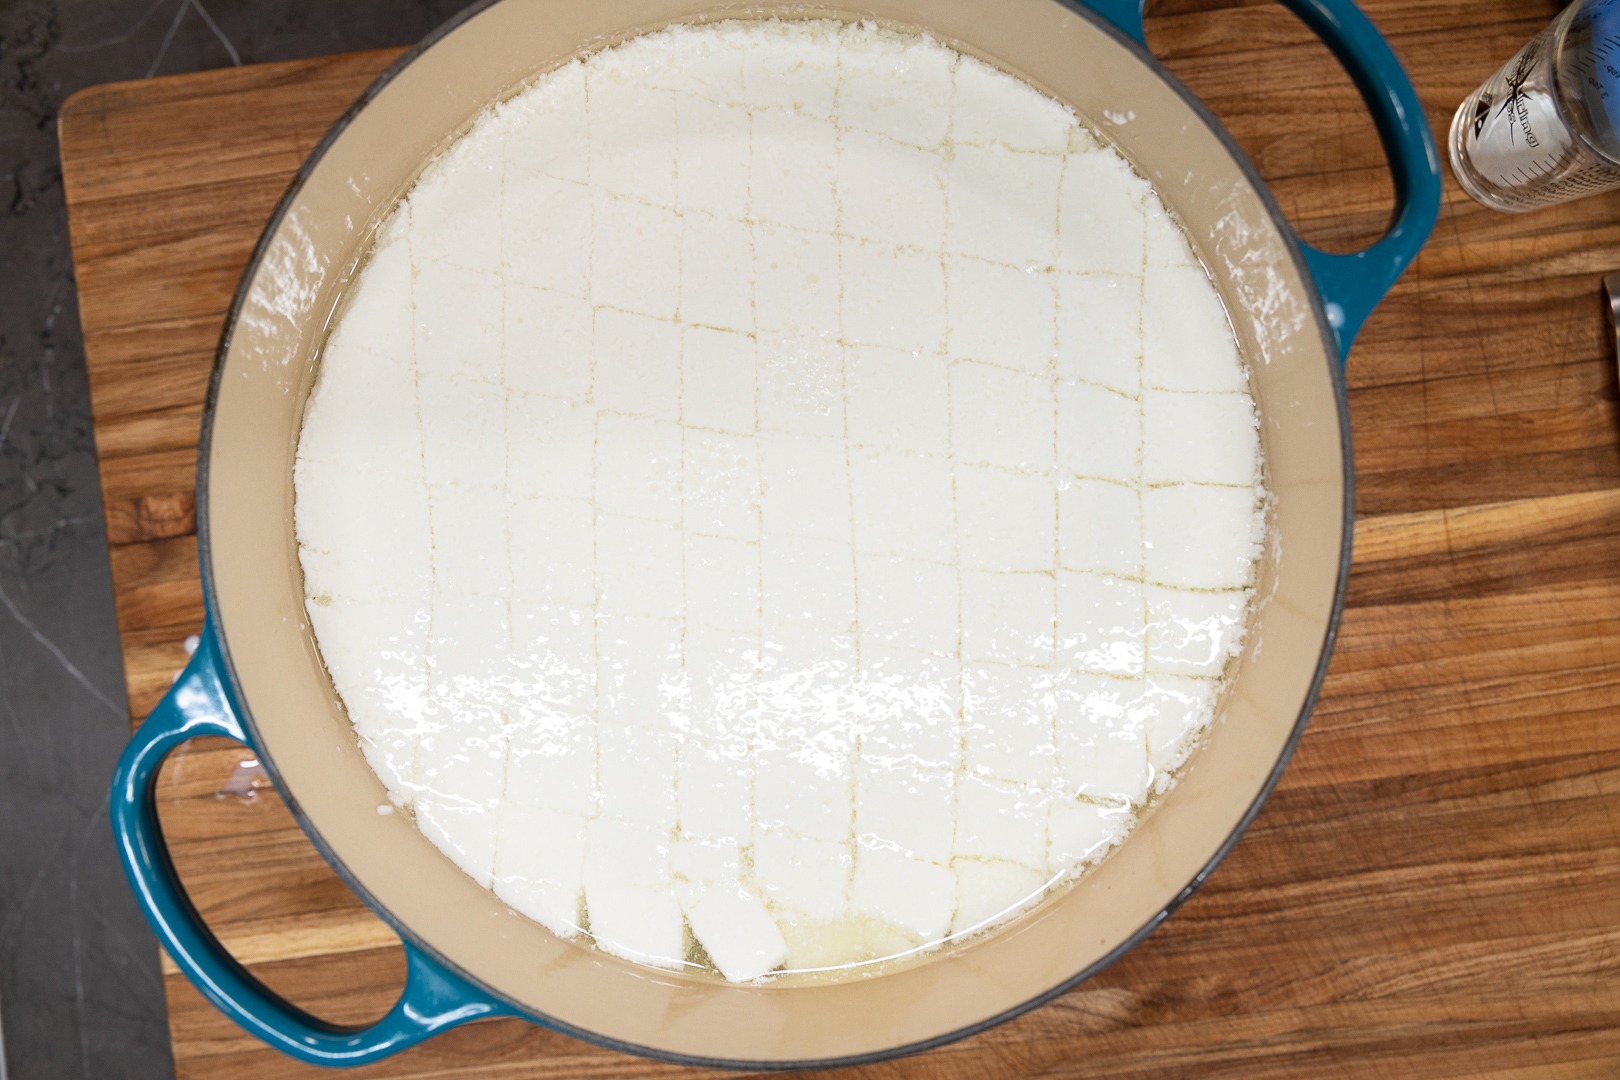 The cut curds in the pot, unstirred